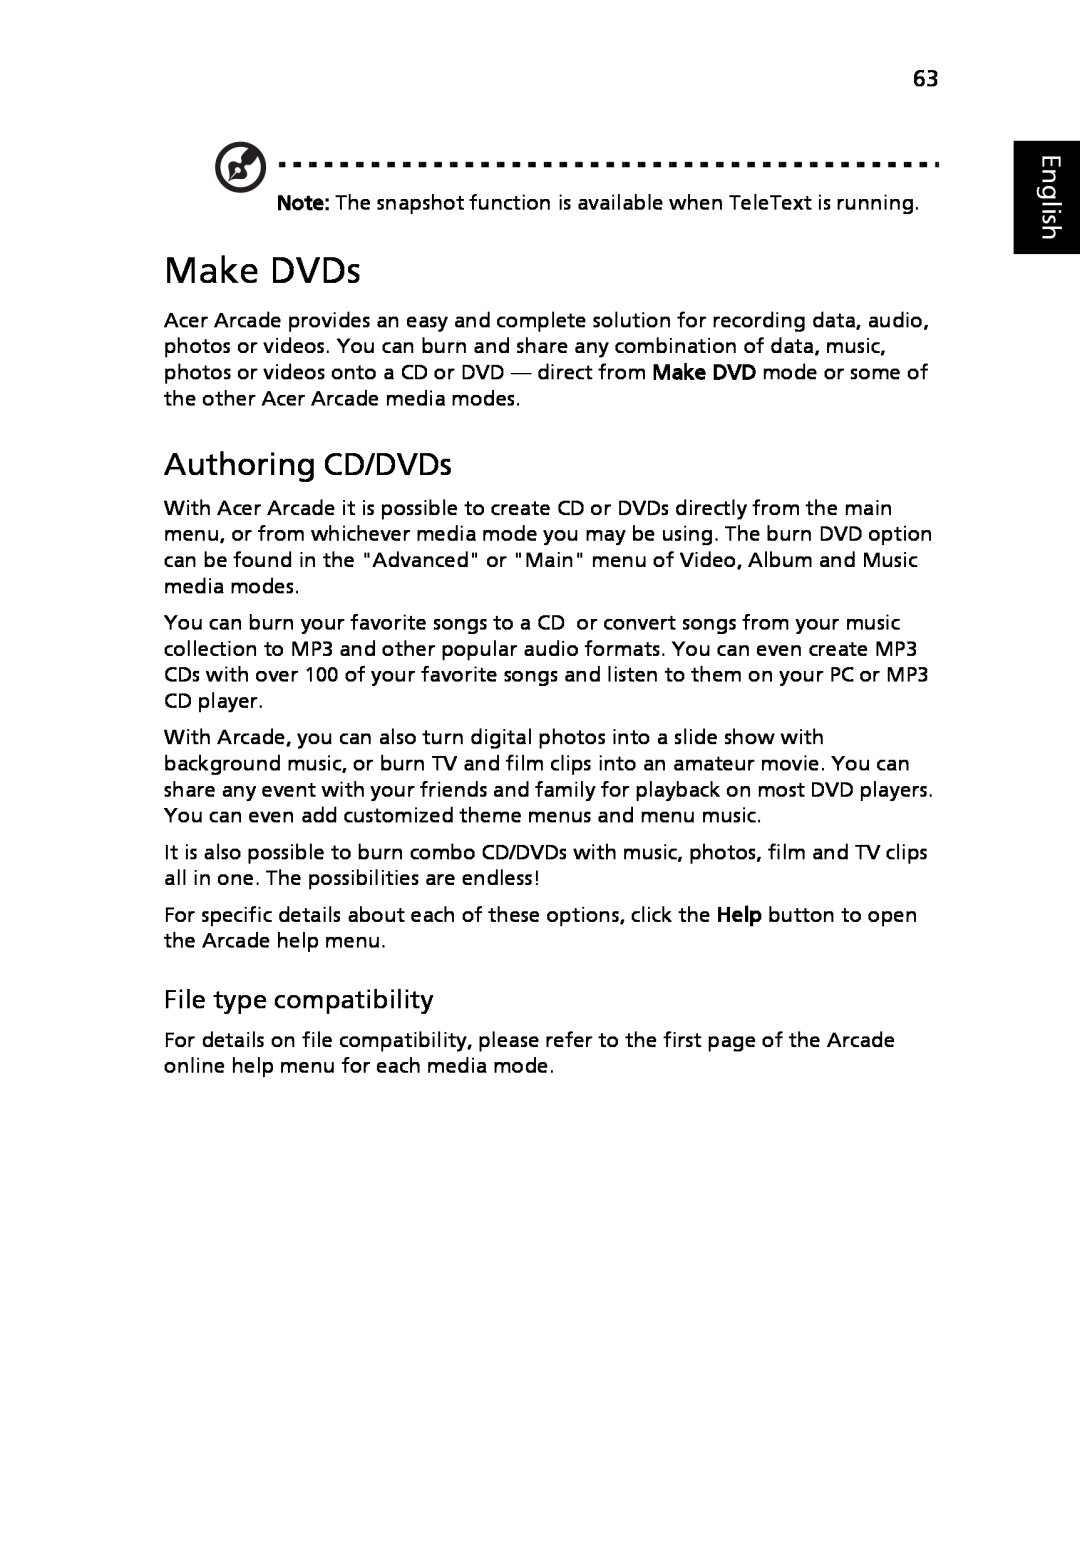 Acer 9120 manual Make DVDs, Authoring CD/DVDs, File type compatibility, English 